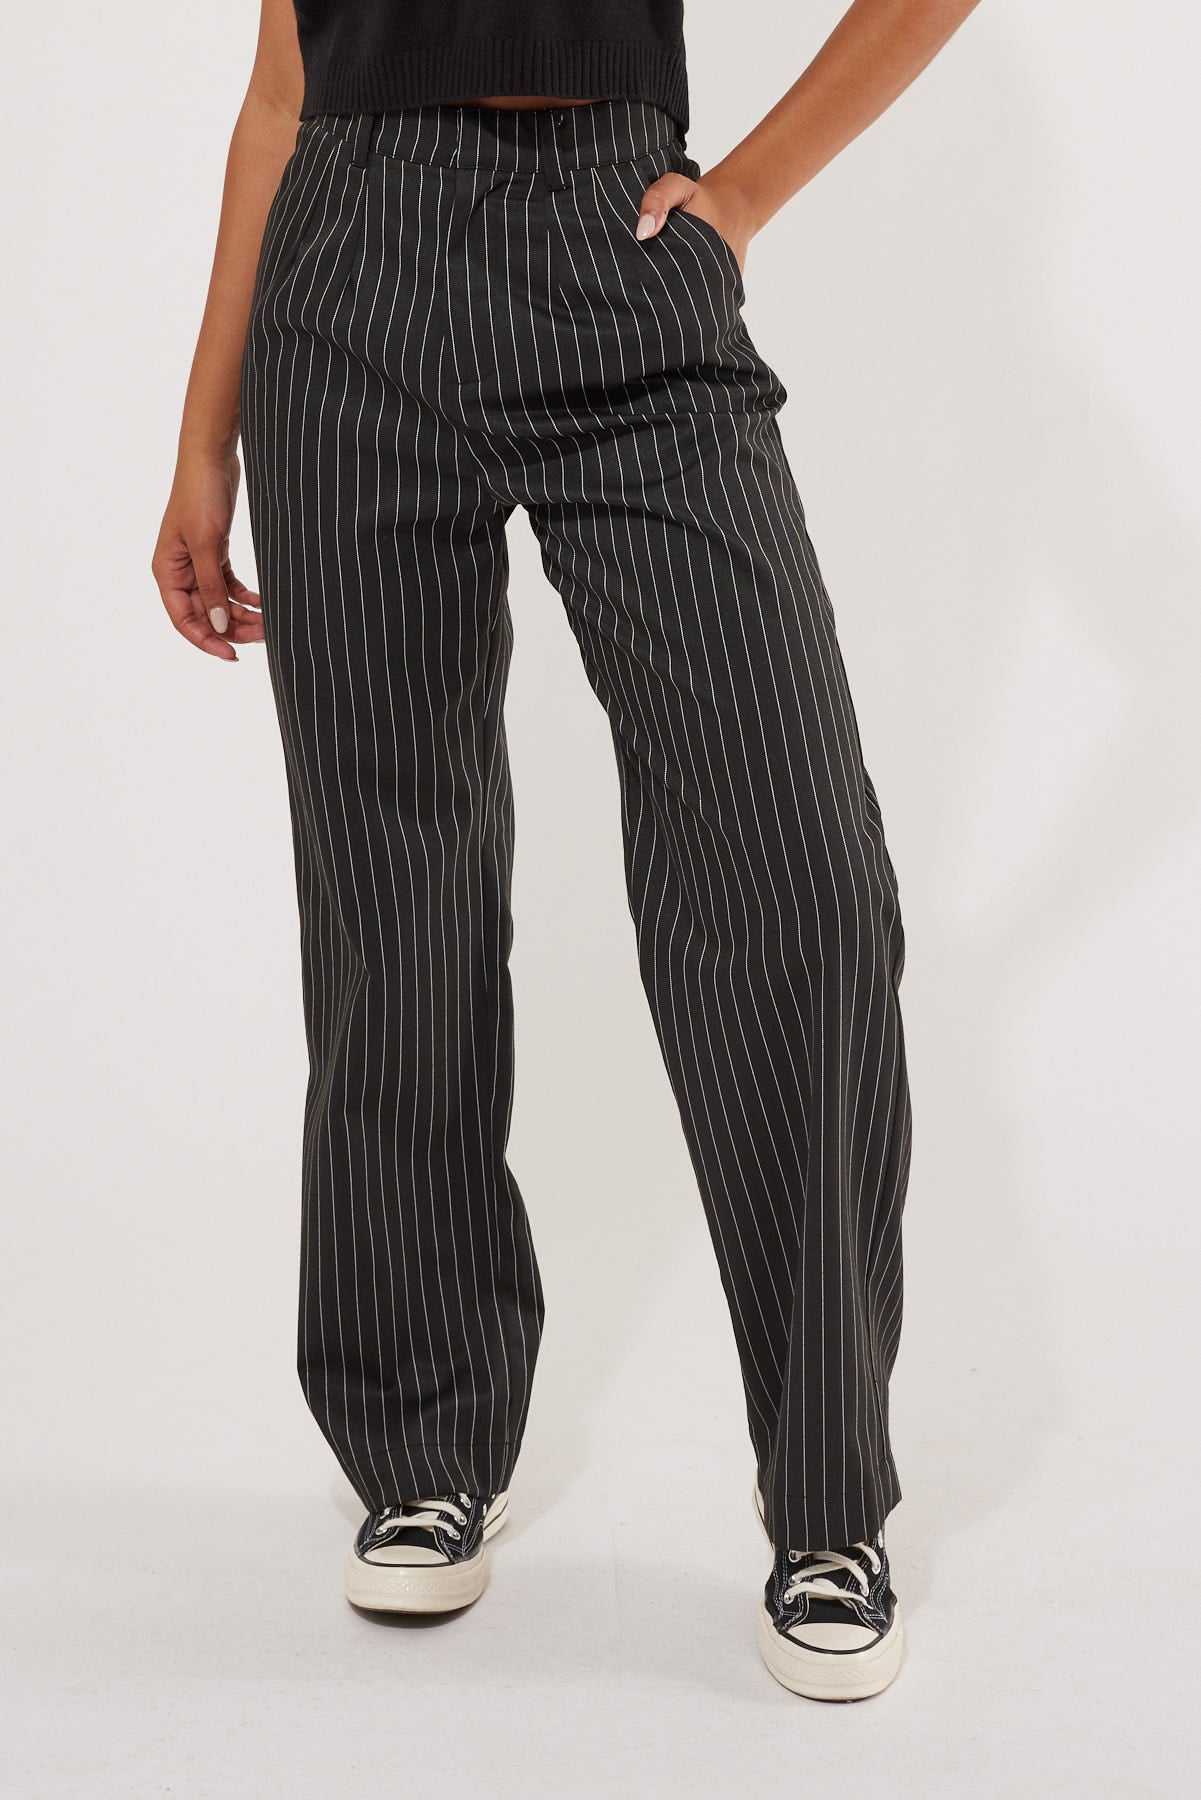 Perfect Stranger Stay With Me Pant Black Pinstripe – Universal Store